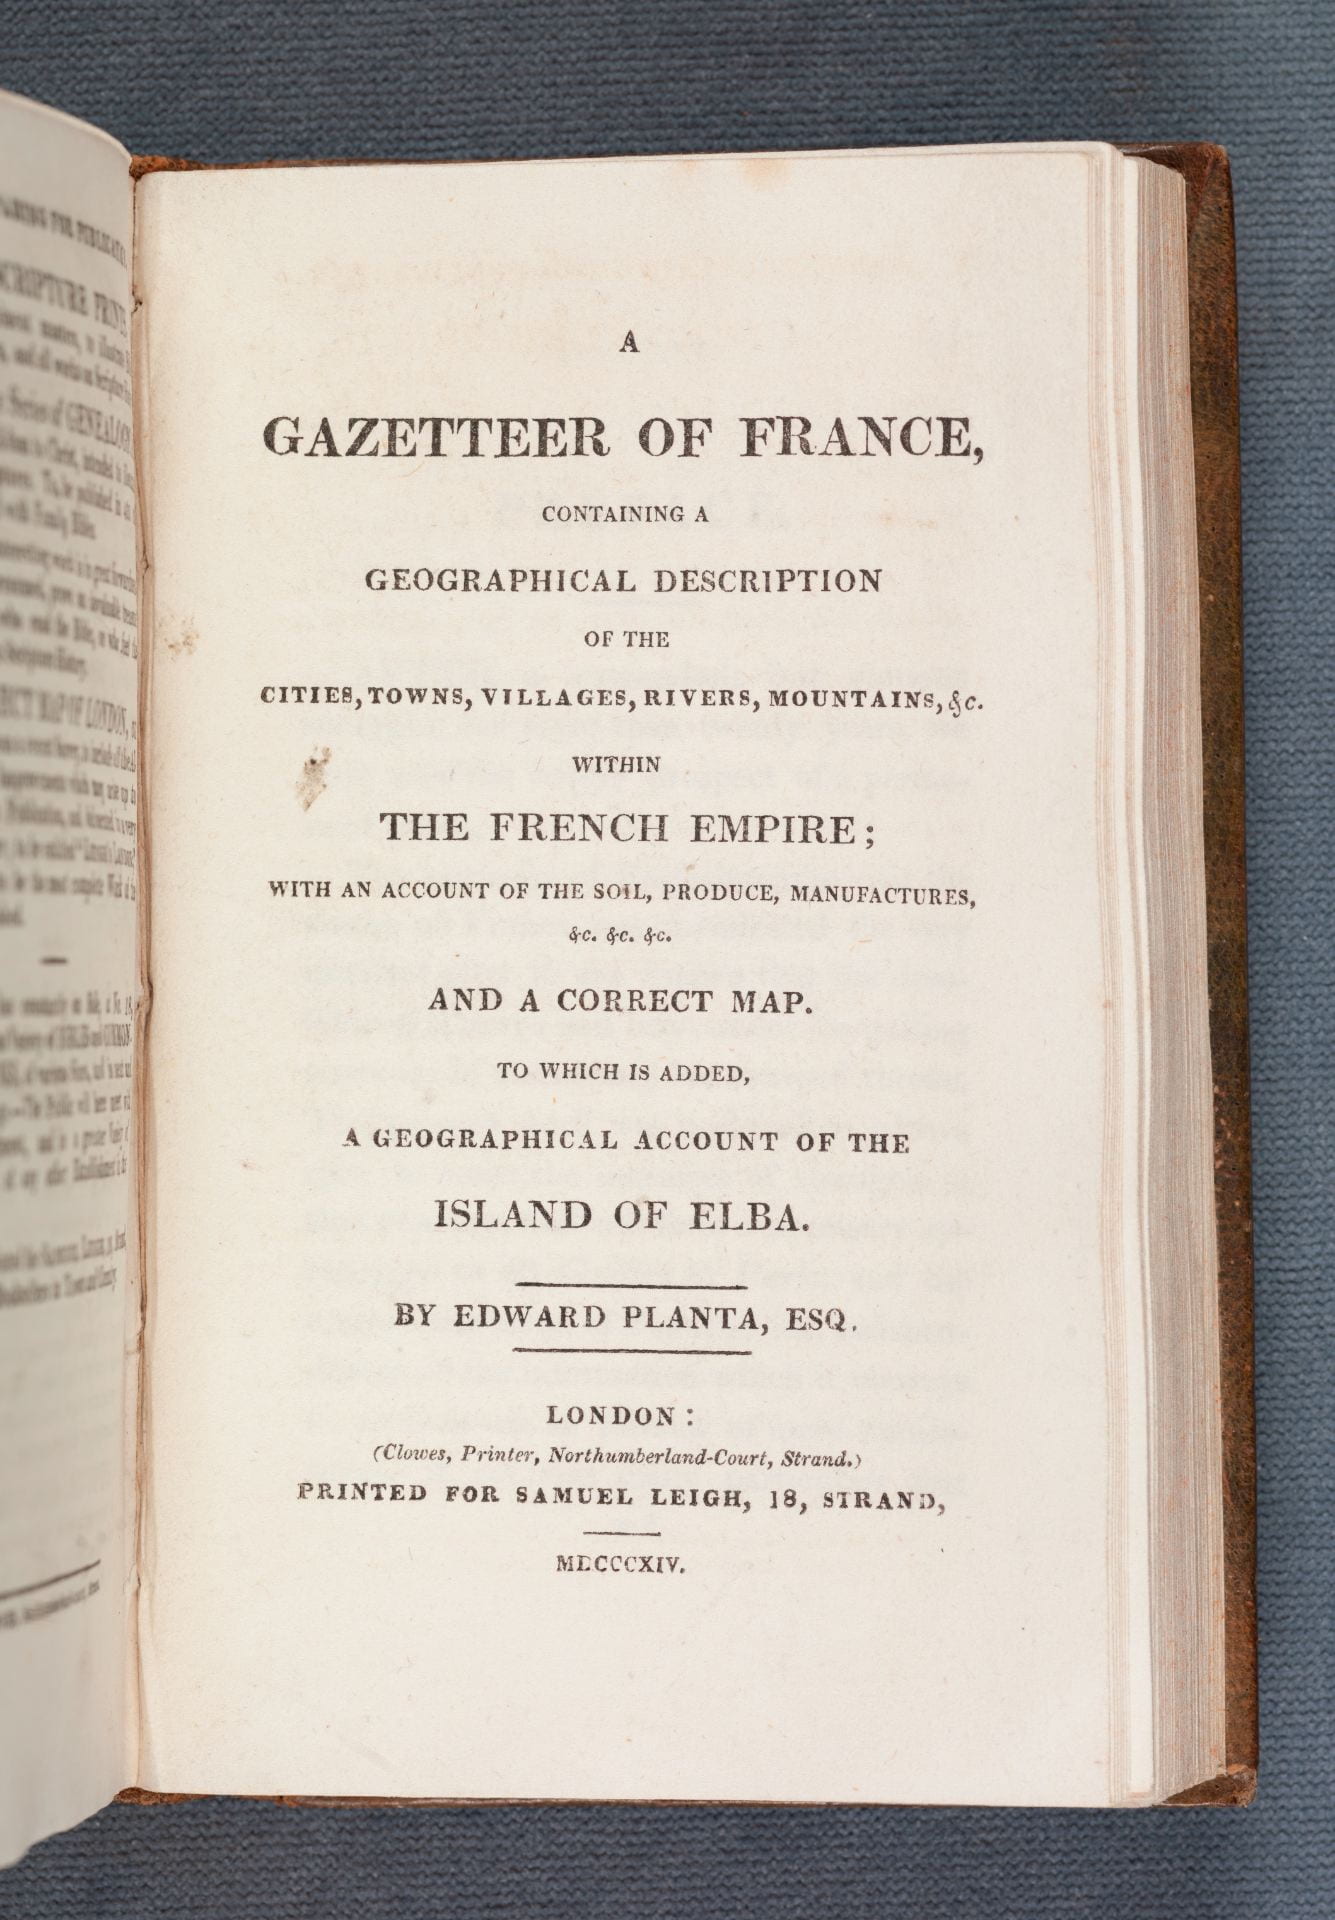 A gazetteer of France | Recent Antiquarian Acquisitions